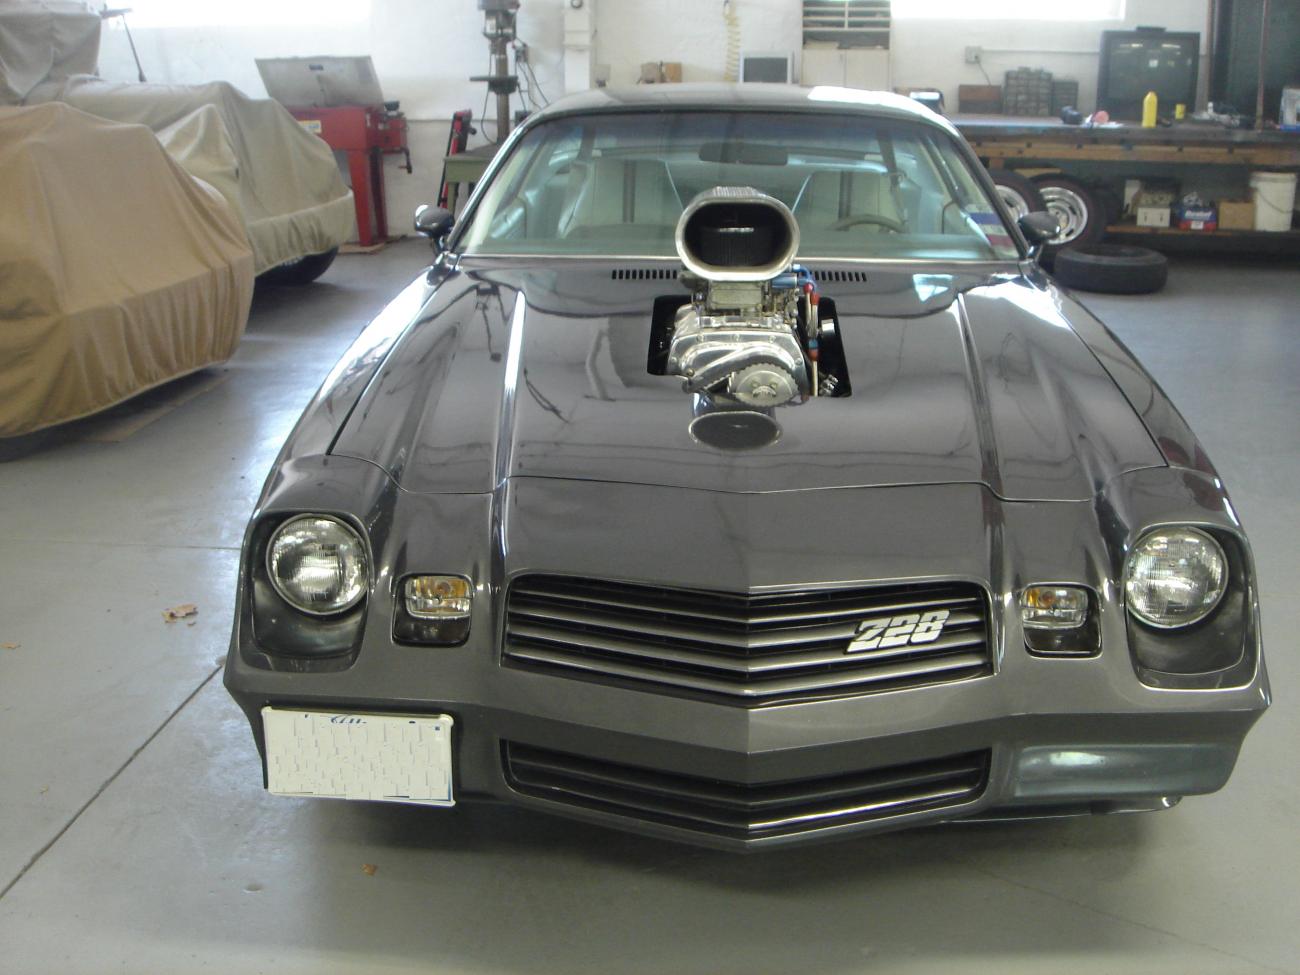 My 1980 Z28 Bought Brand New in 1980.

Charcoal Metalic gray 30 years ago !

Original Paint and interior with a Dyers 6/71 w/air unheard of at the time. Still in The garage.